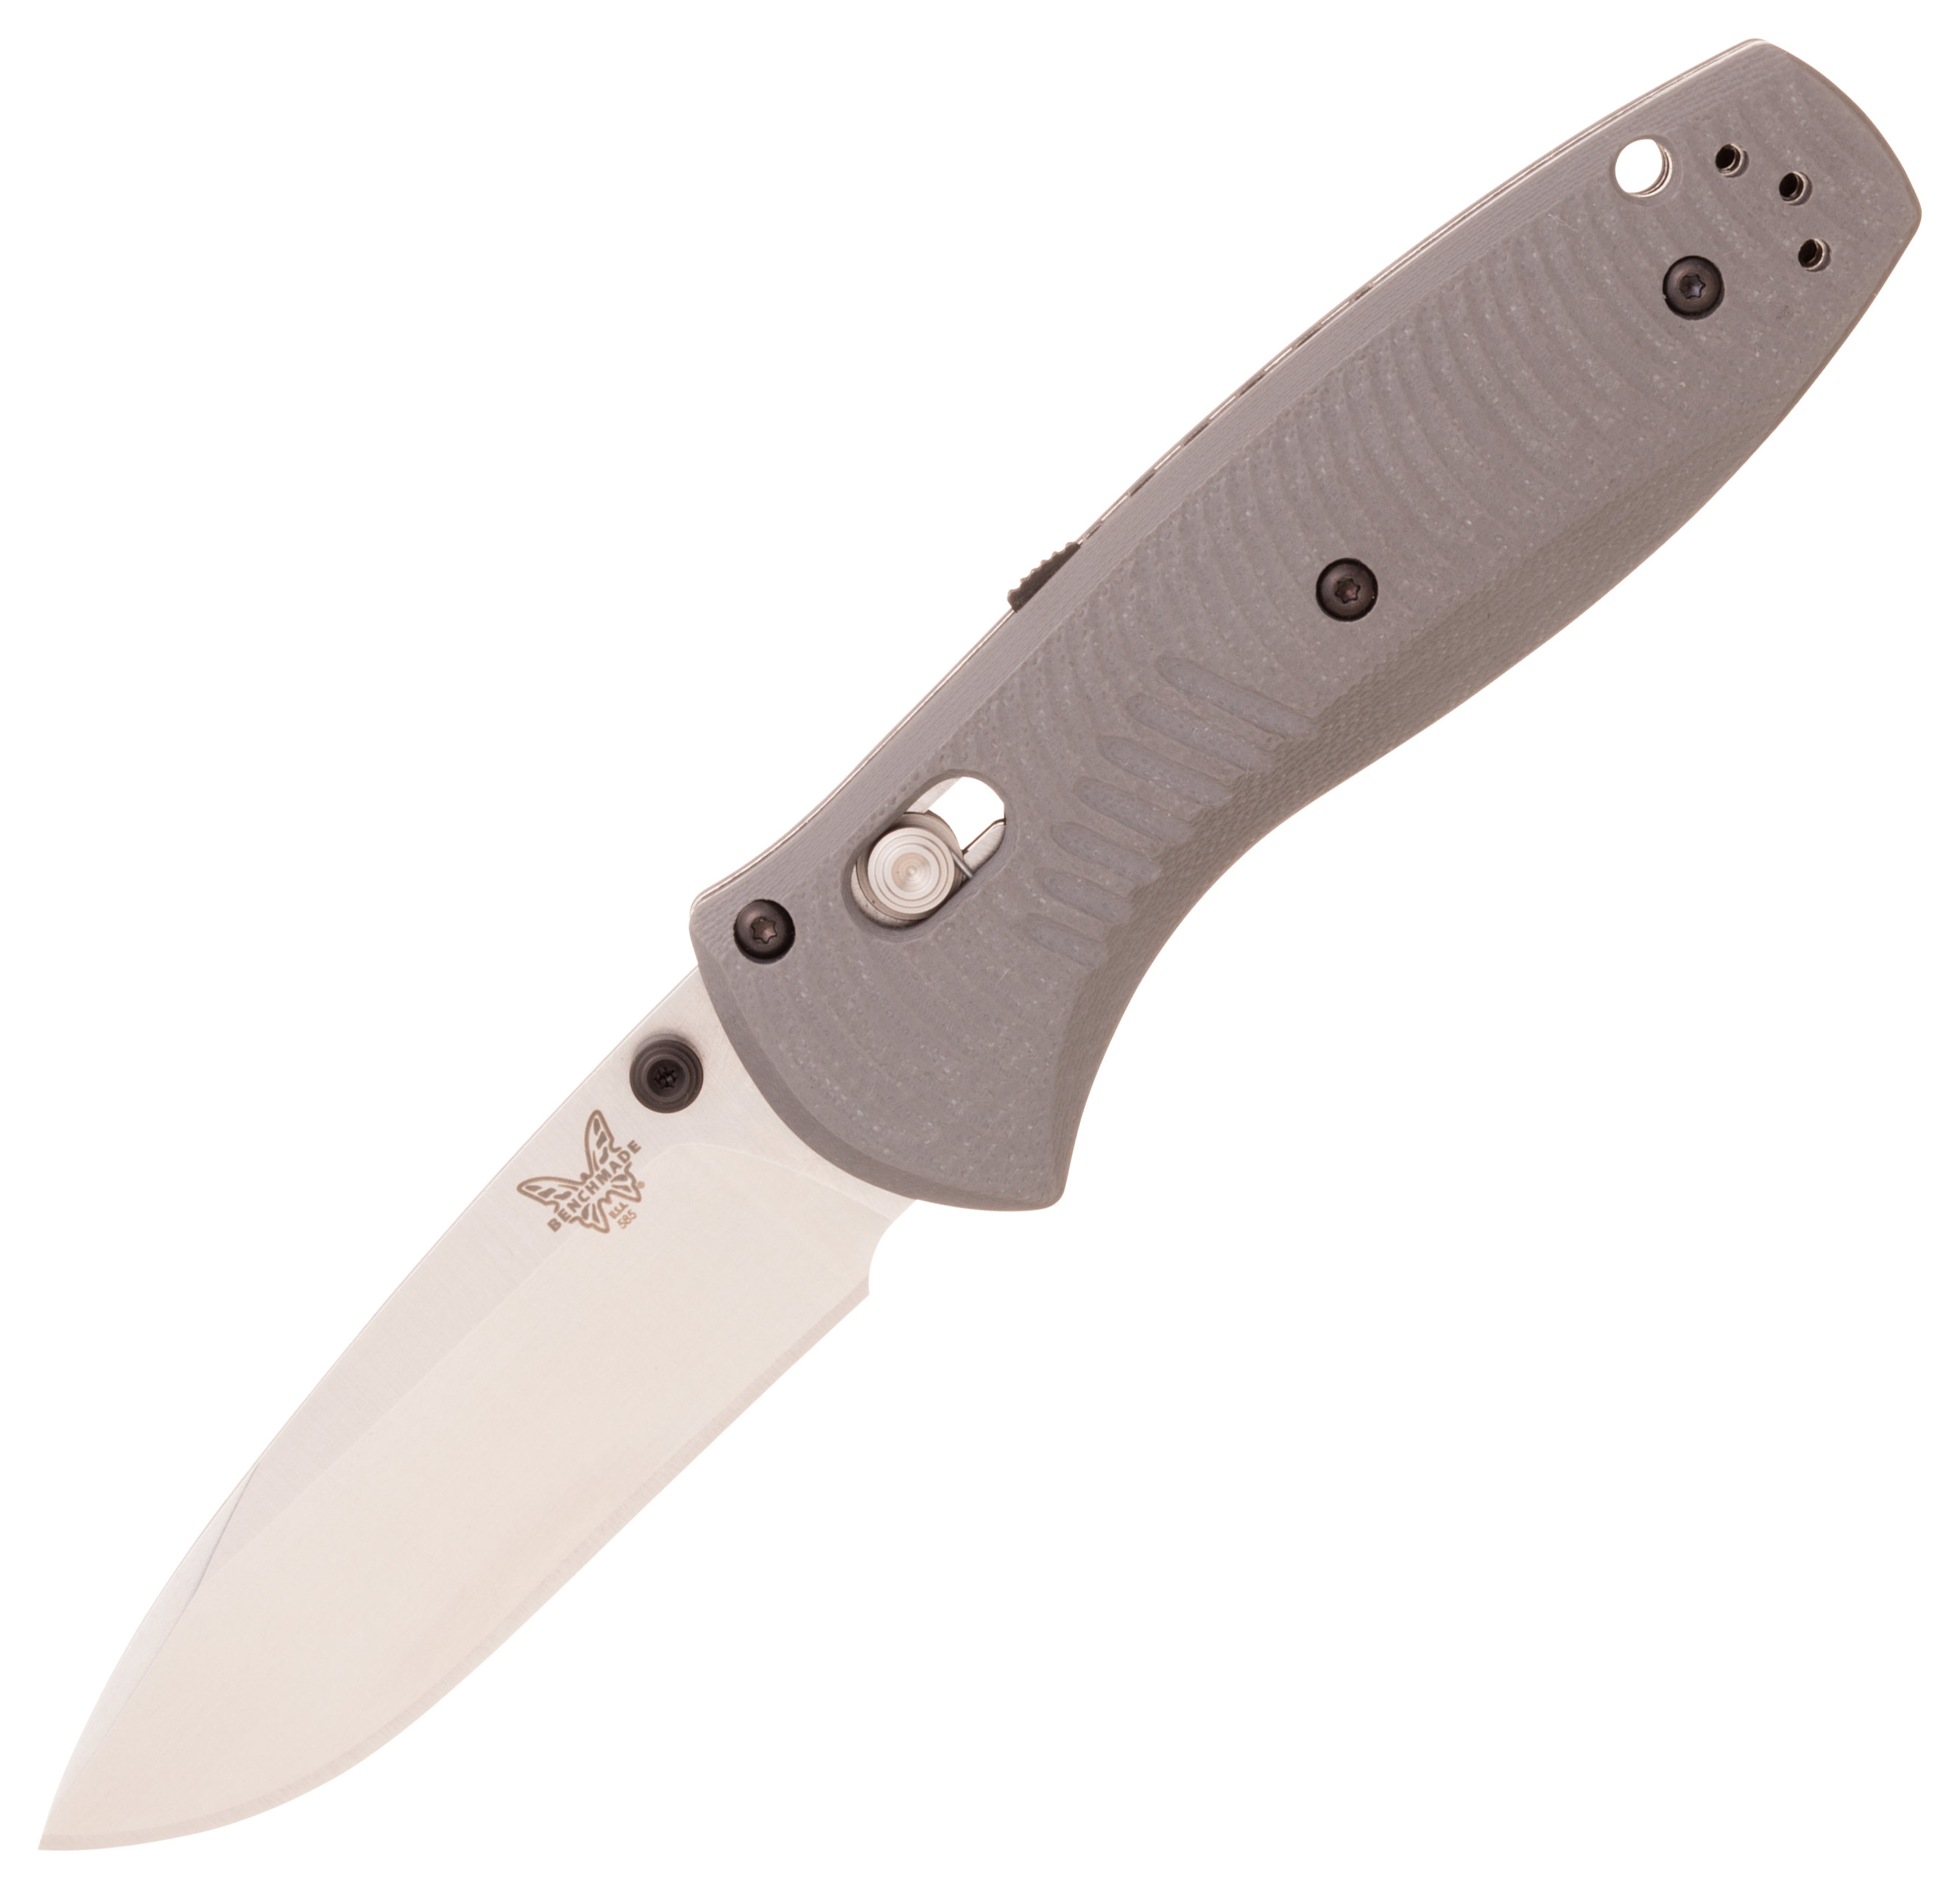 Benchmade Mini-Barrage G-10 Axis Assist Folding Knife